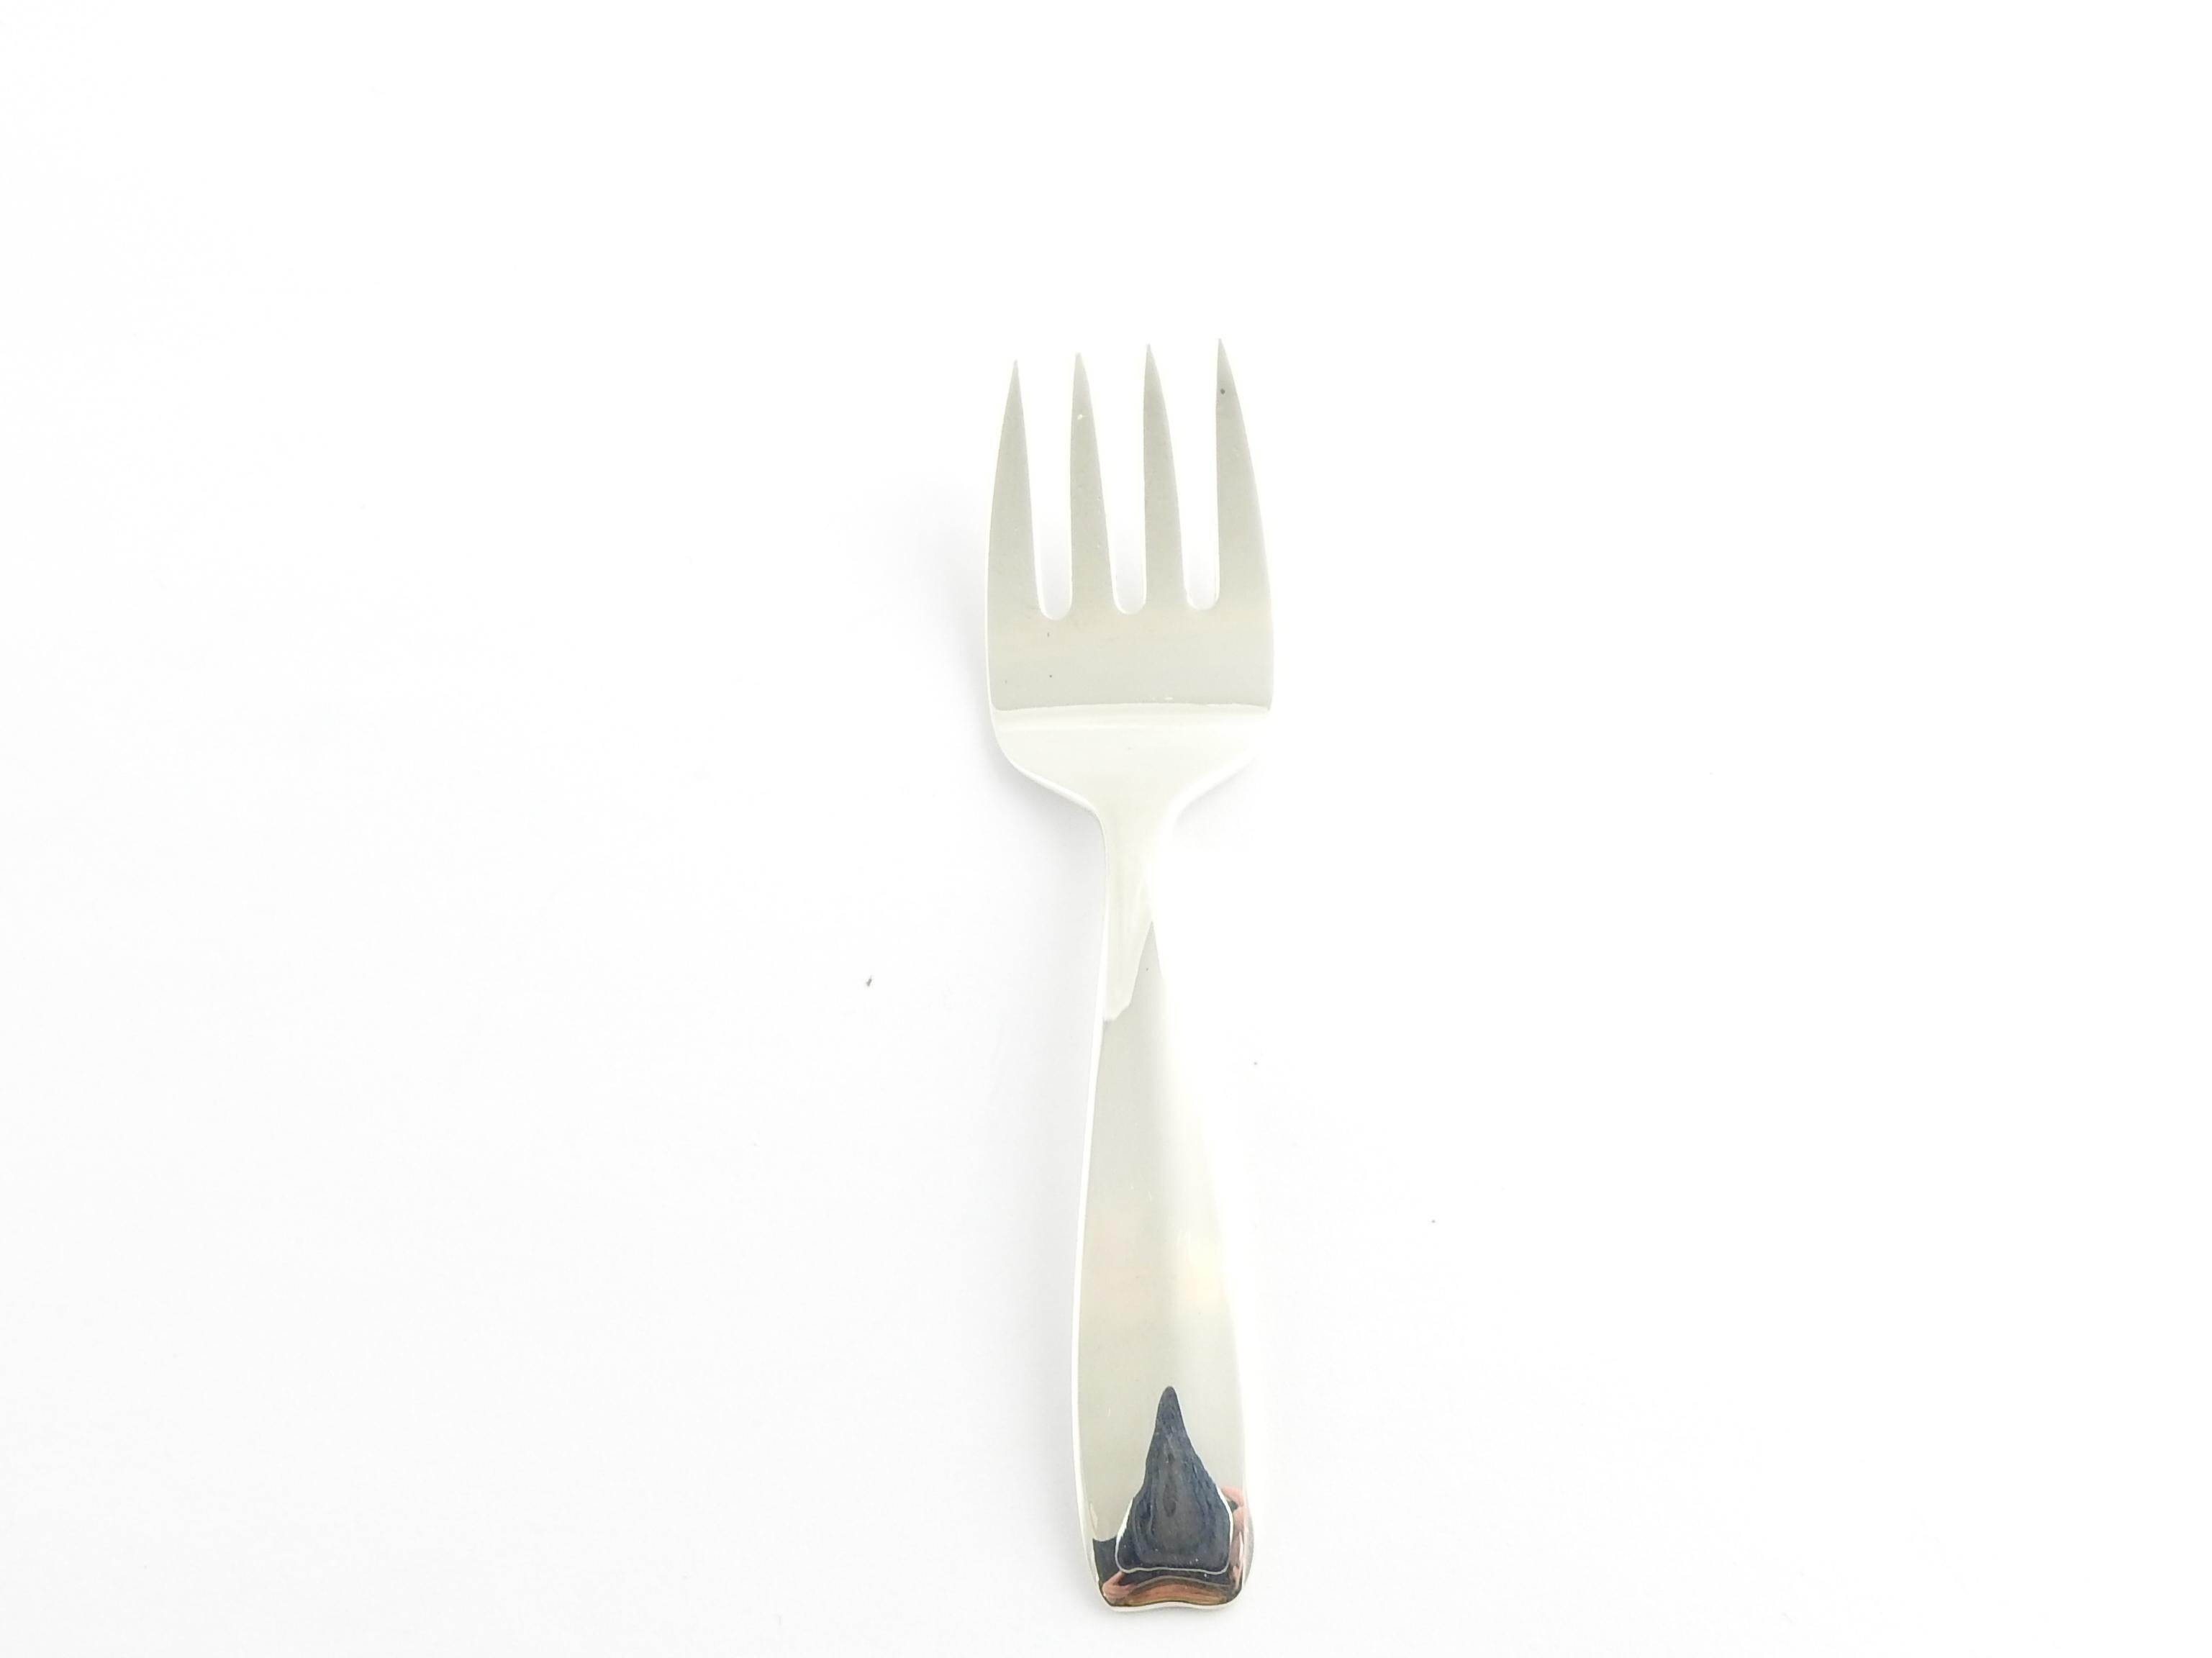 Vintage Cordis Tiffany & Co. sterling silver baby feeding fork

This authentic Tiffany & Co. feeding fork is approx. 4